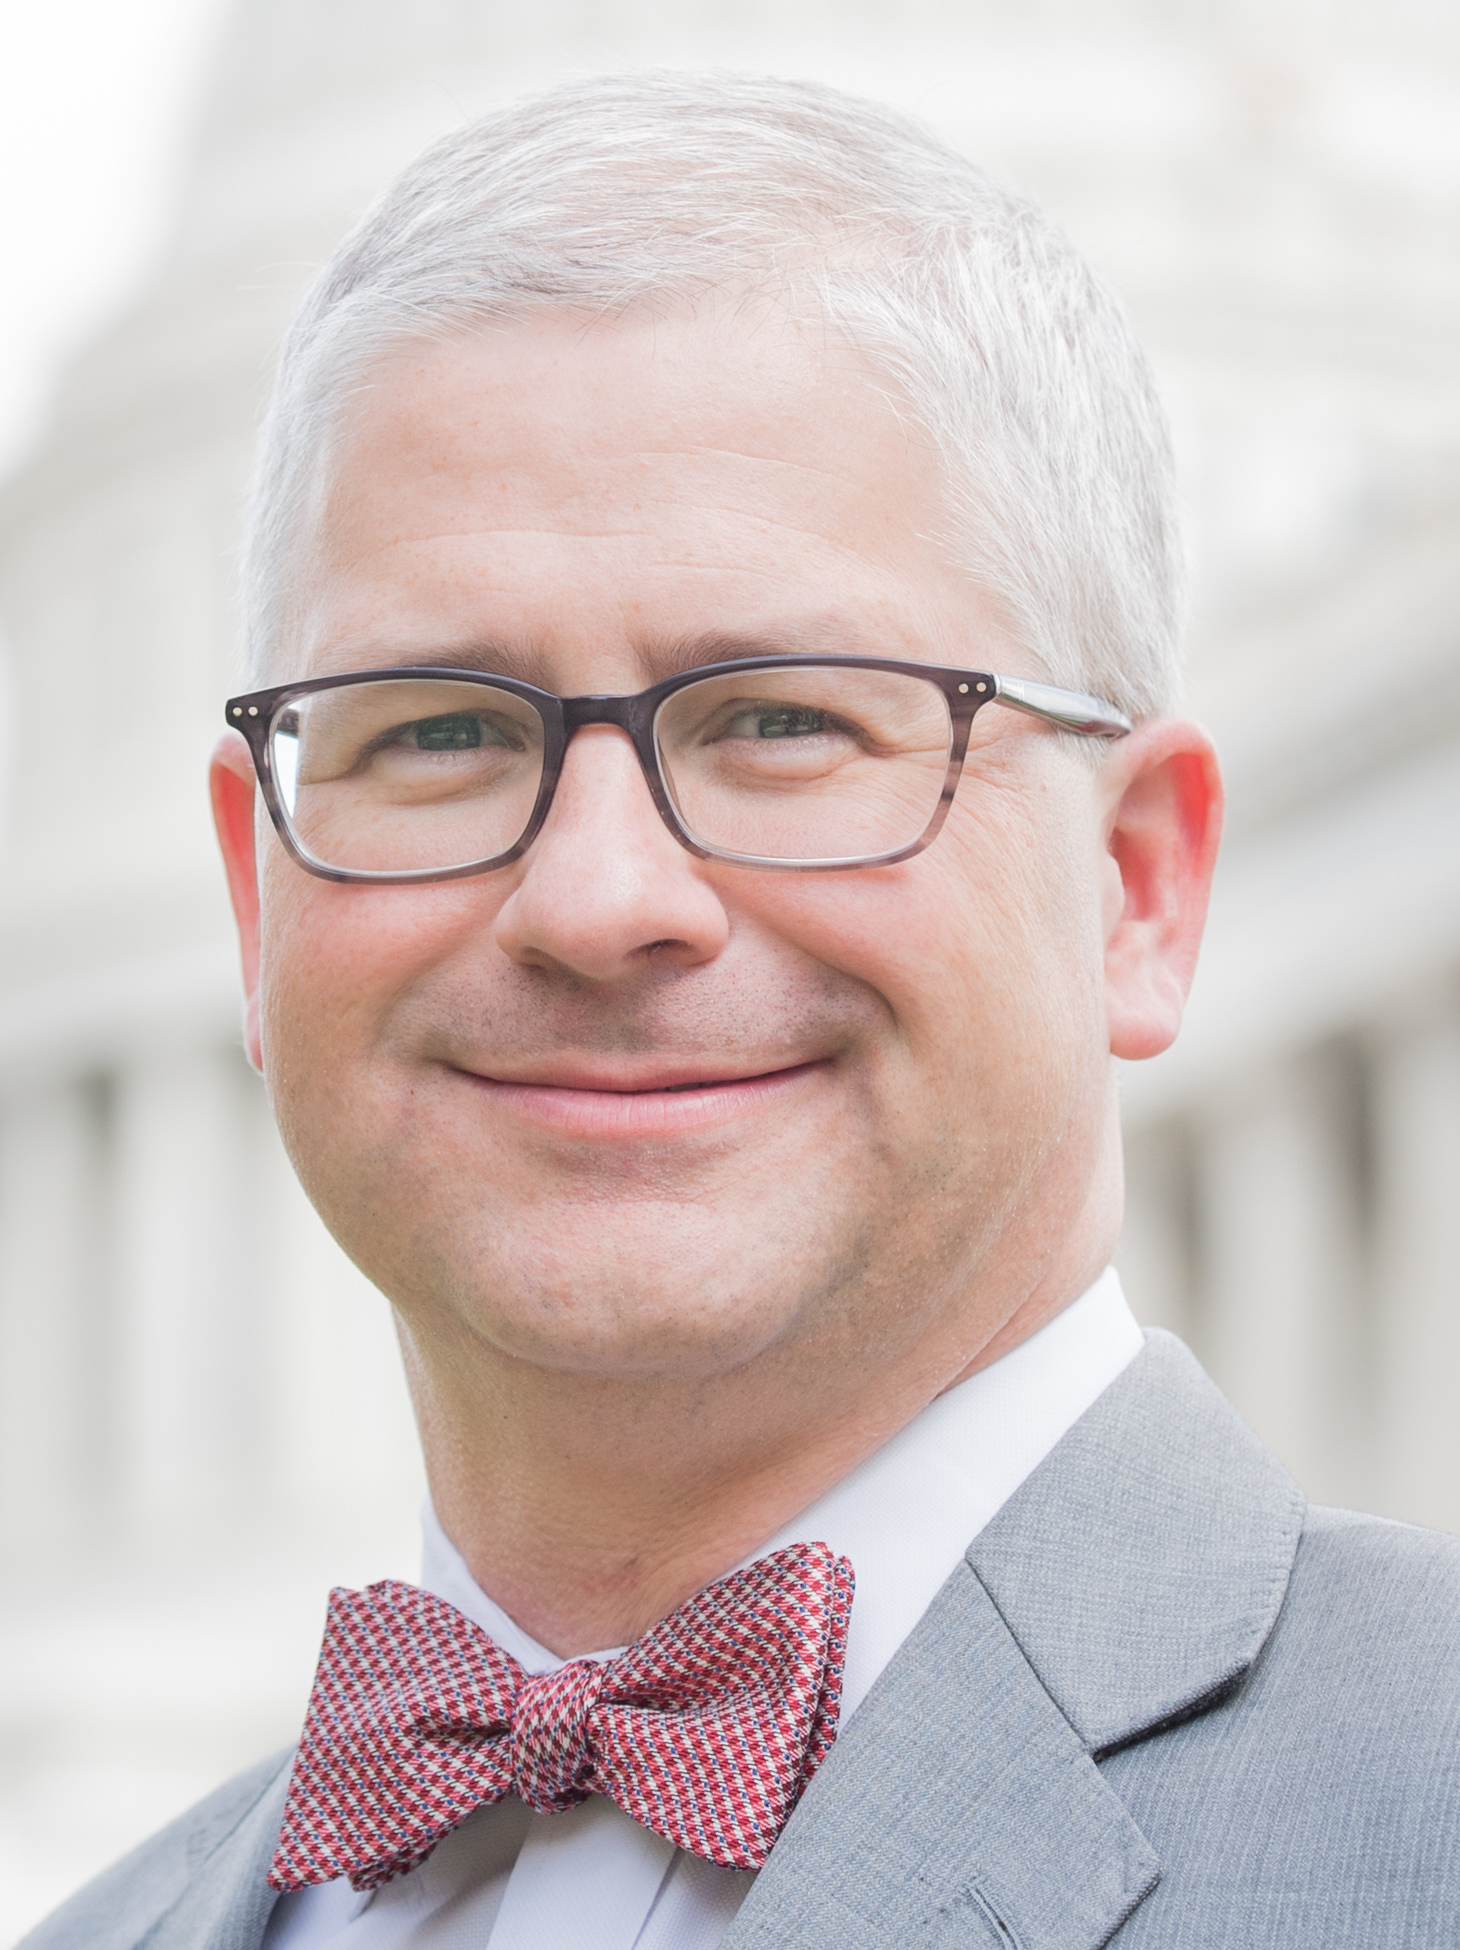 Patrick McHenry, a Republican representative from North Carolina, has been appointed as interim Speaker of the House while a replacement for Rep. Kevin McCarthy is decided on.
